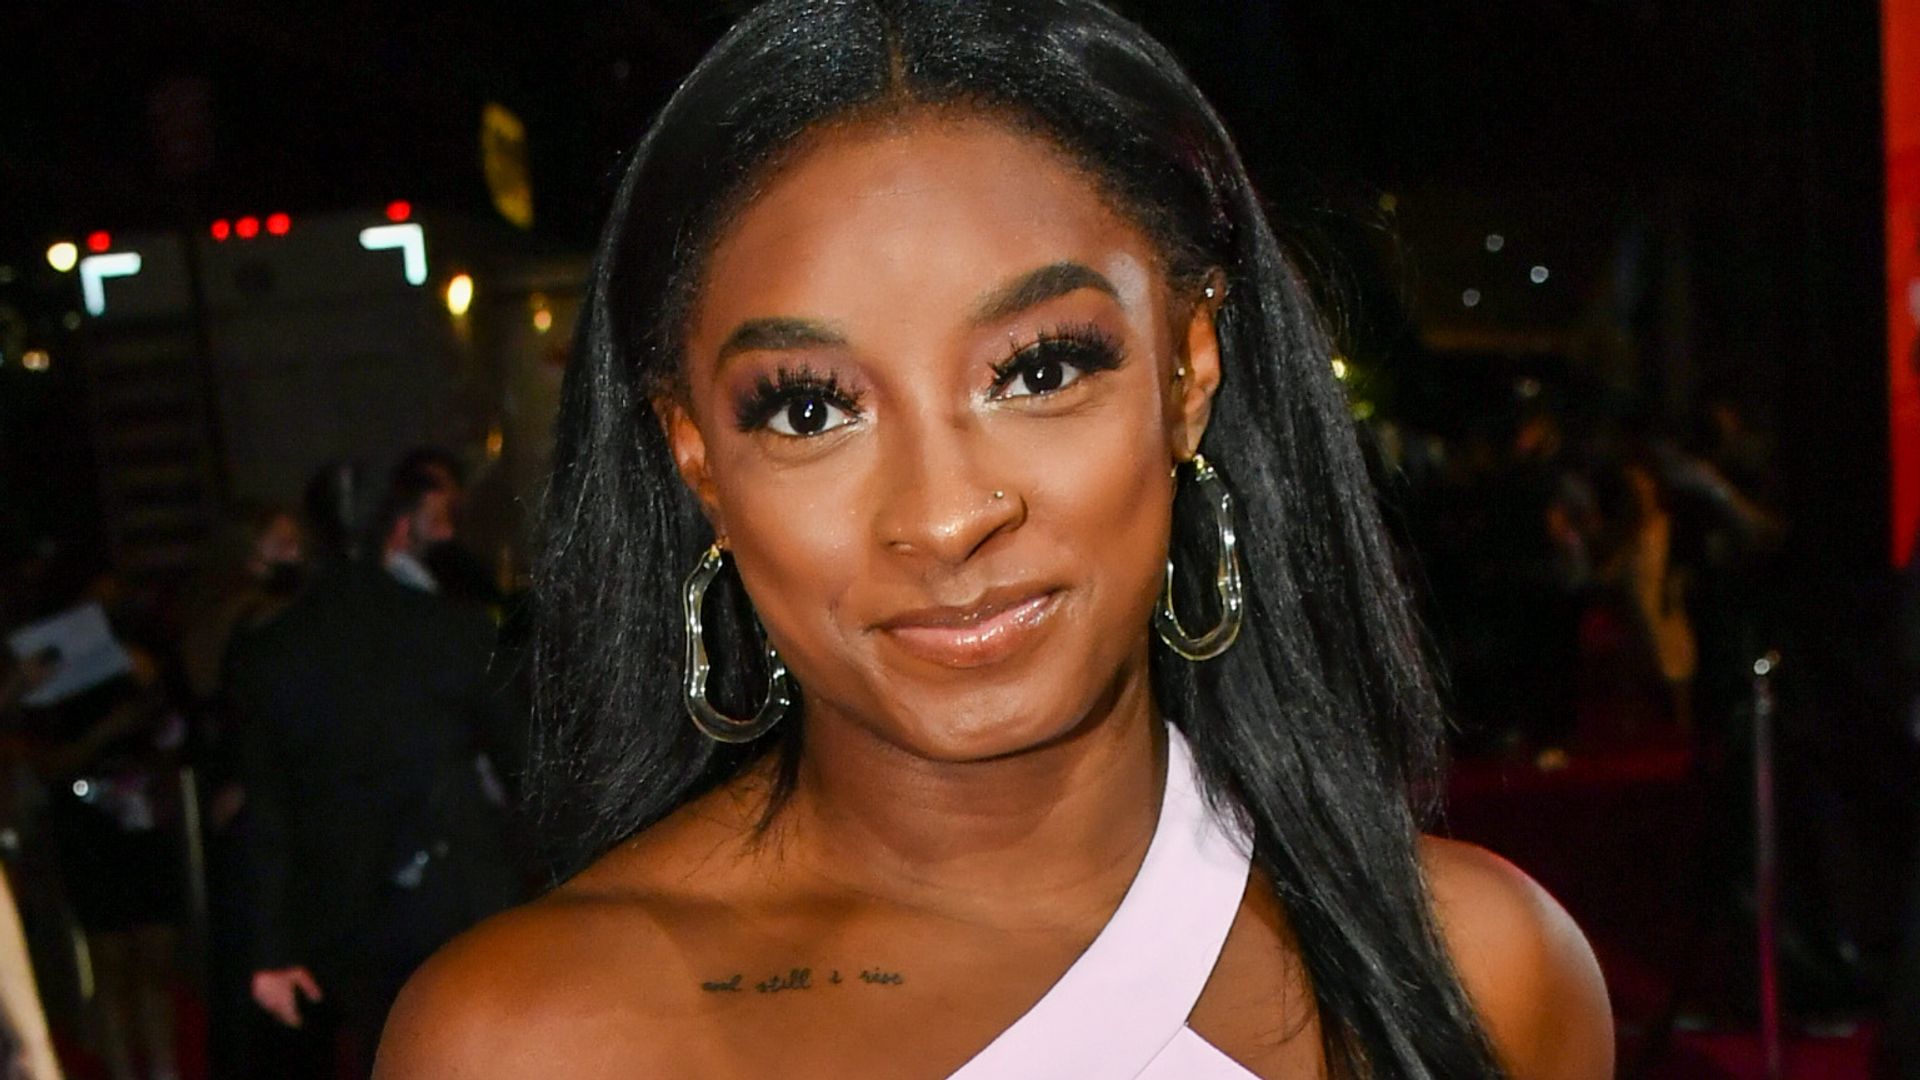 Simone Biles in a one-shoulder dress and hoop earrings on the red carpet